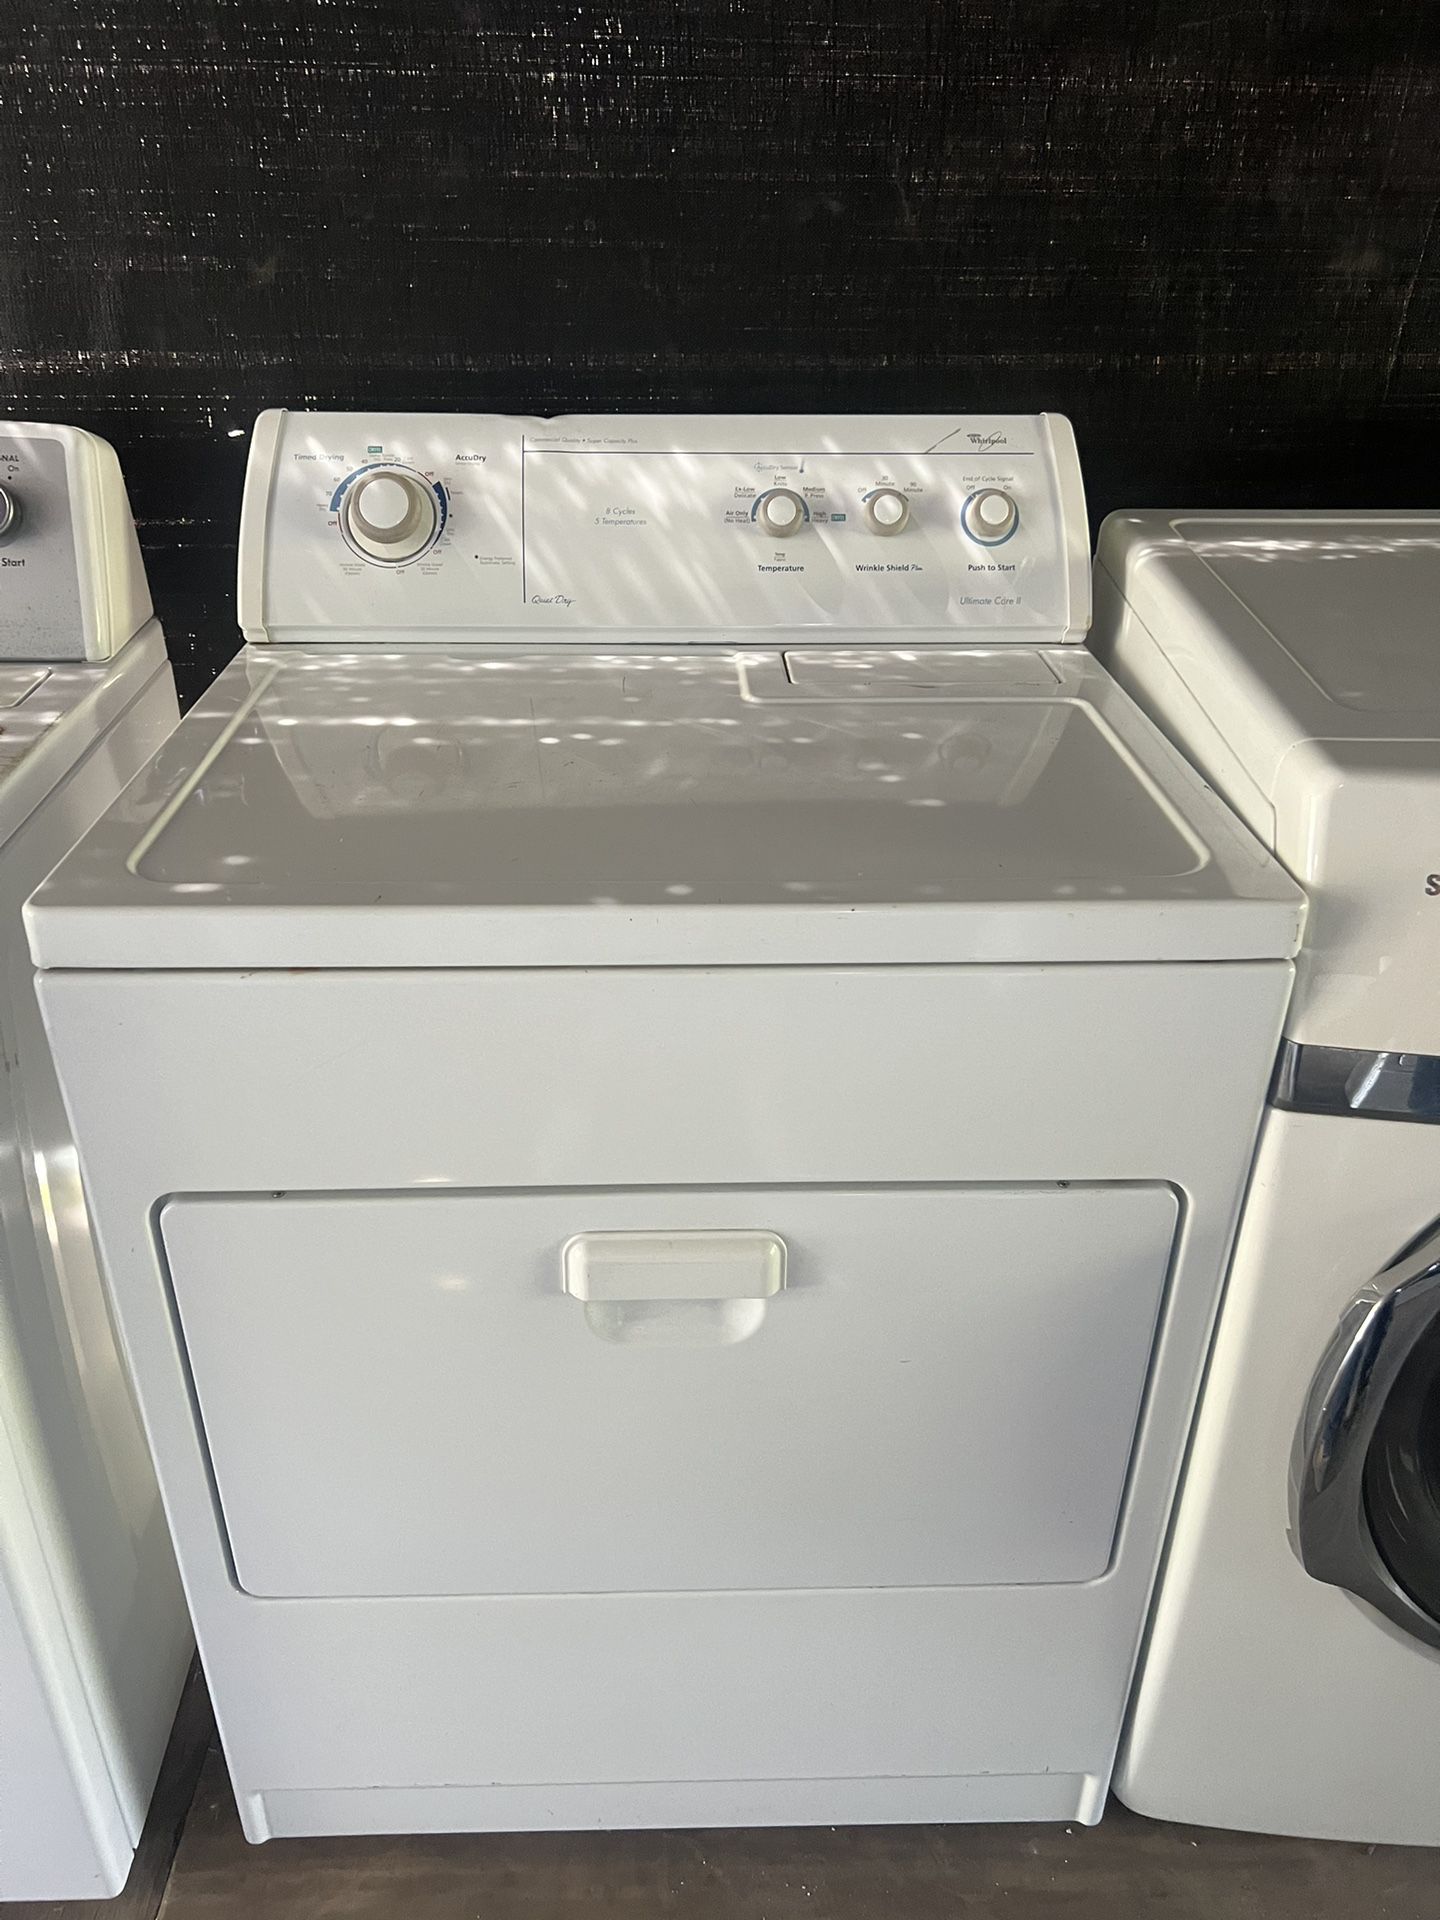 Whirlpool Dryer   60 day warranty/ Located at:📍5415 Carmack Rd Tampa Fl 33610📍 